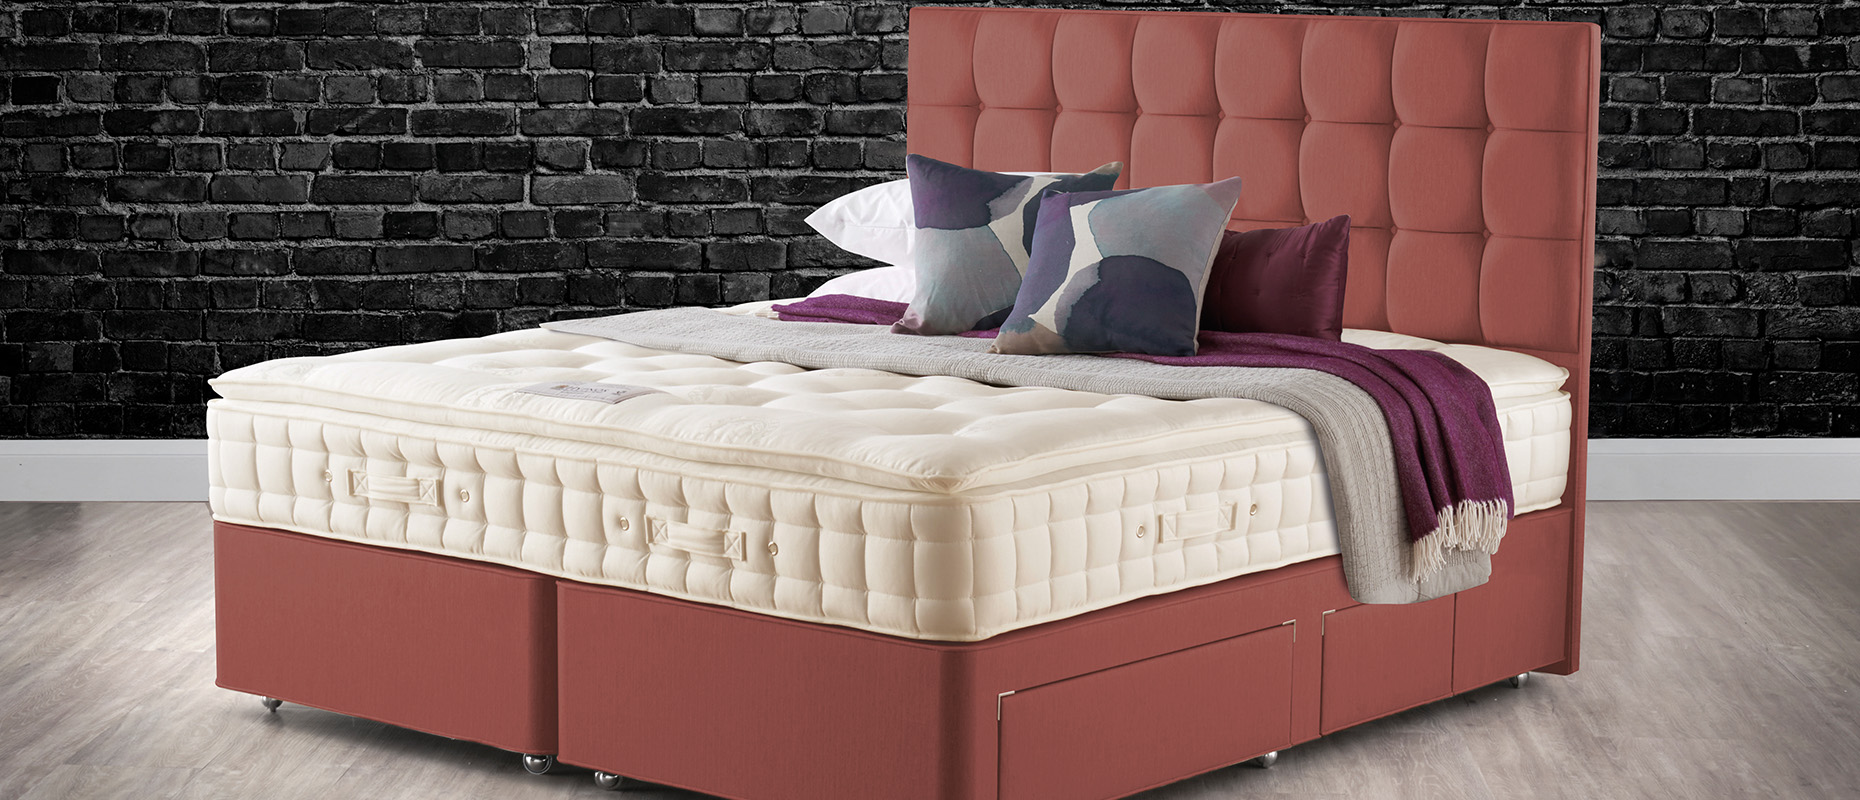 Superior Pillow Top Divan collection at Forrest Furnishing